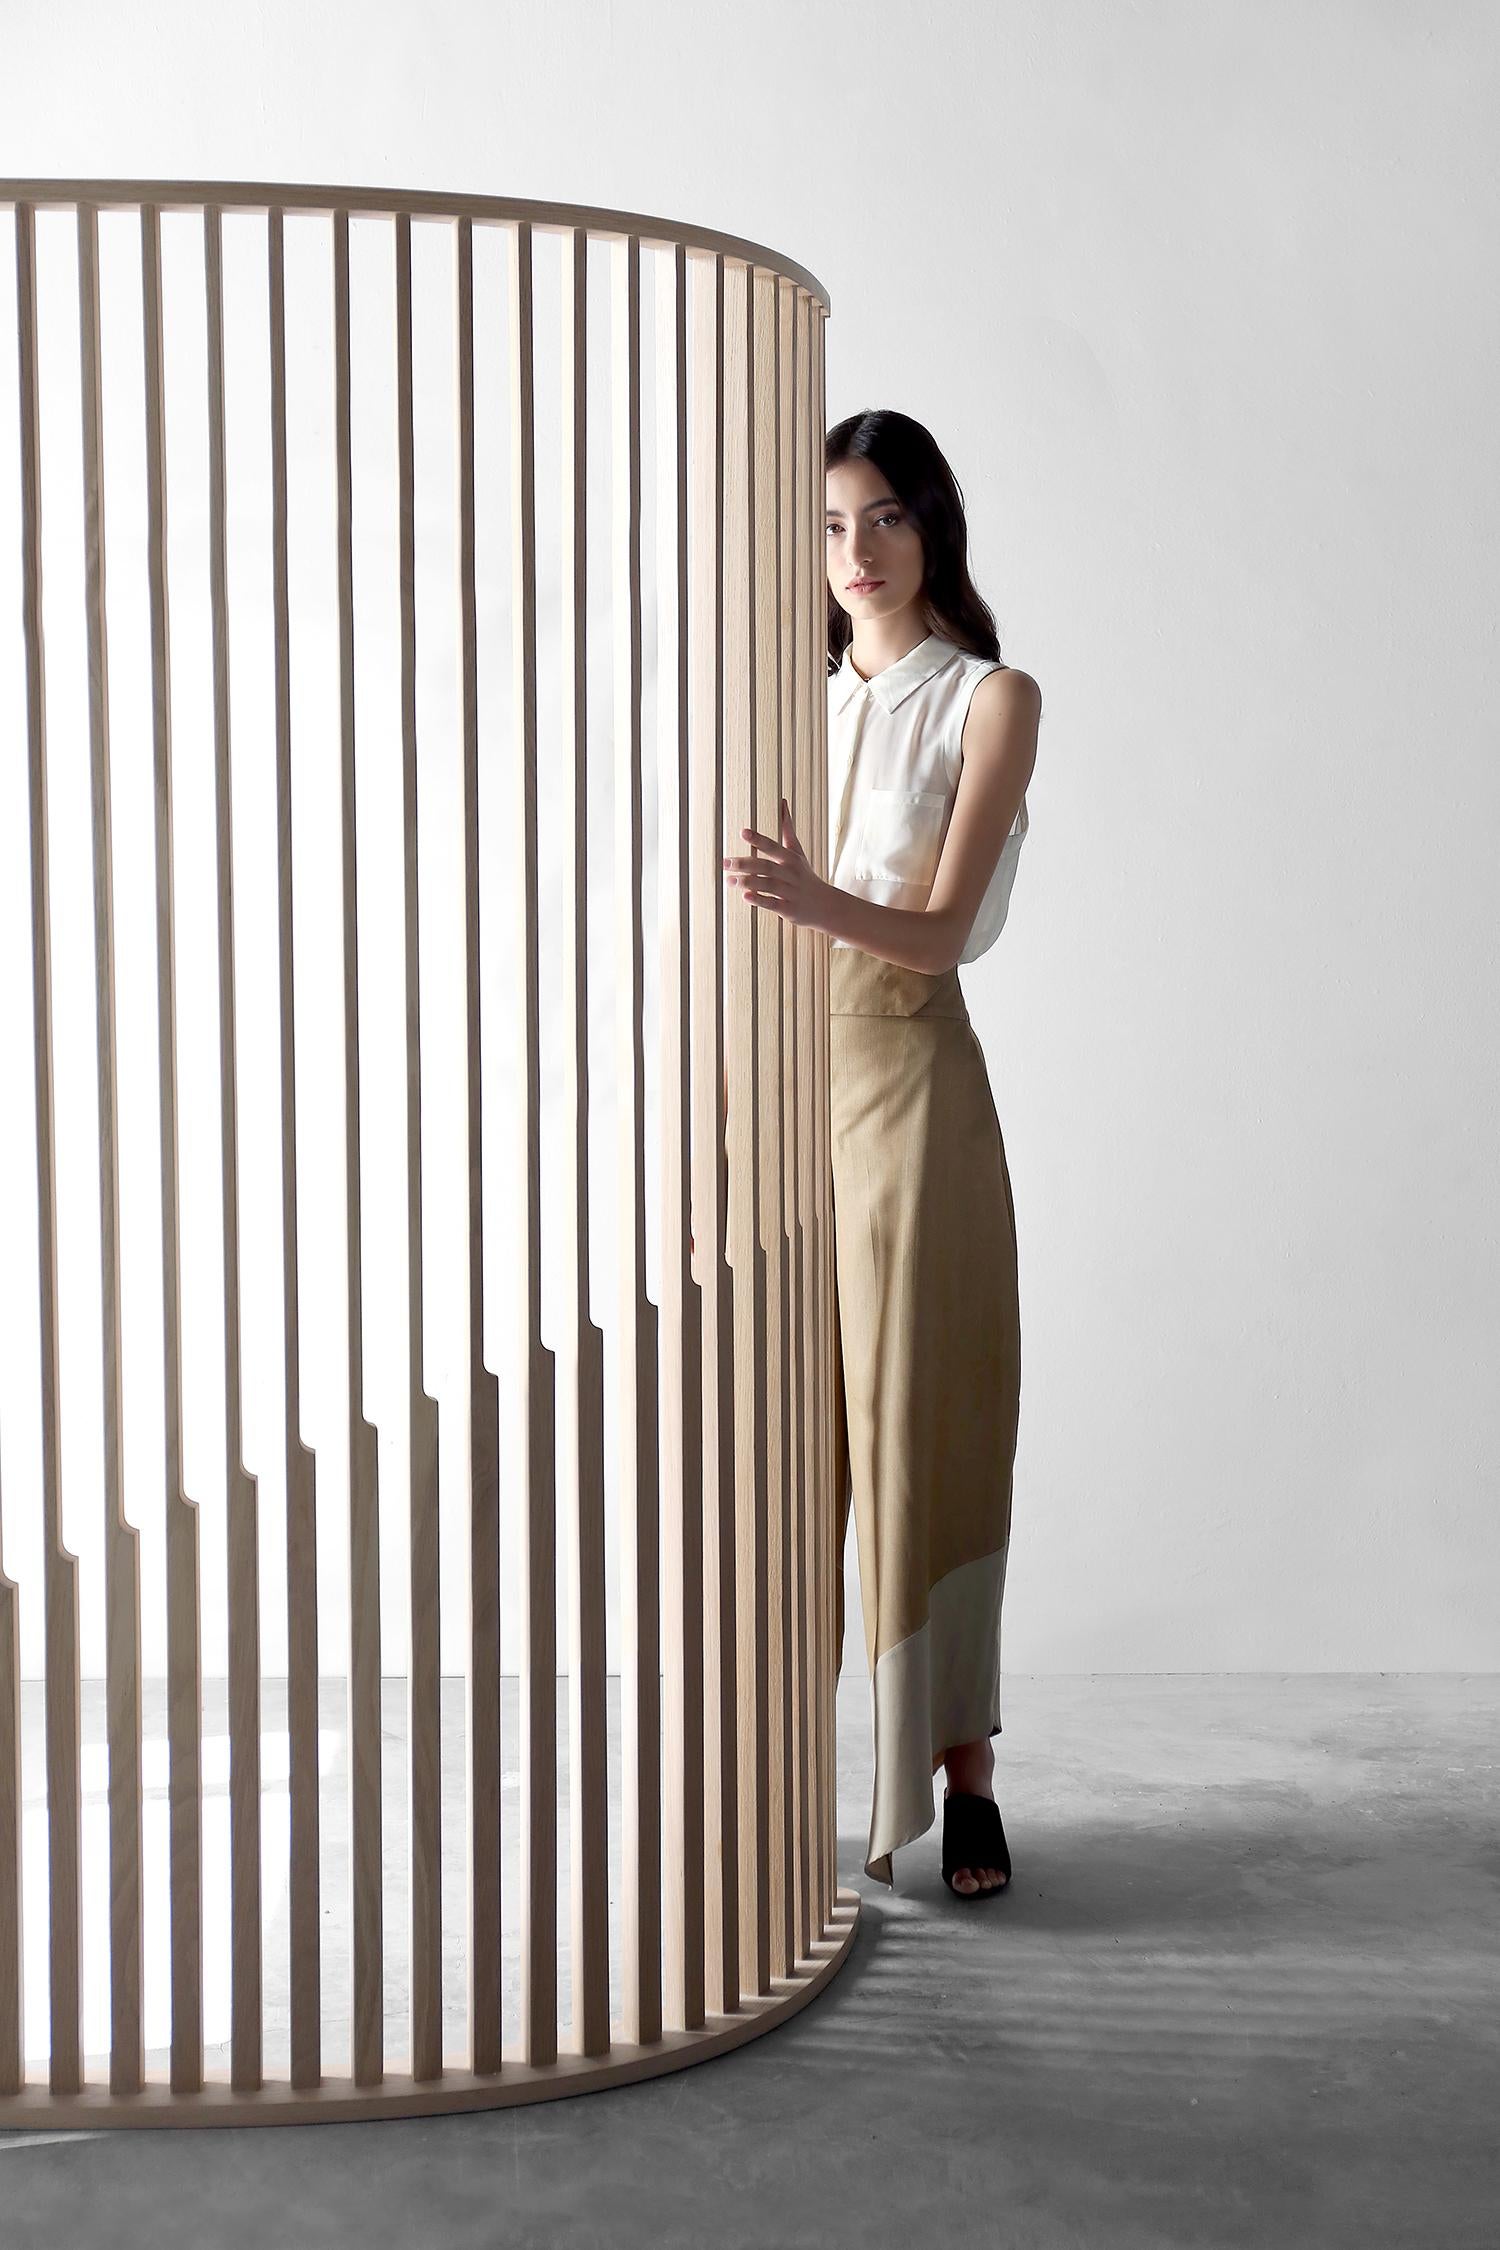 Laws of Motion Small Room Divider in Oak Wood, Screen by Joel Escalona

Laws of Motion is a furniture collection that through a series of different typologies explores concepts like force, gravity and movement. Each of these functional sculptures